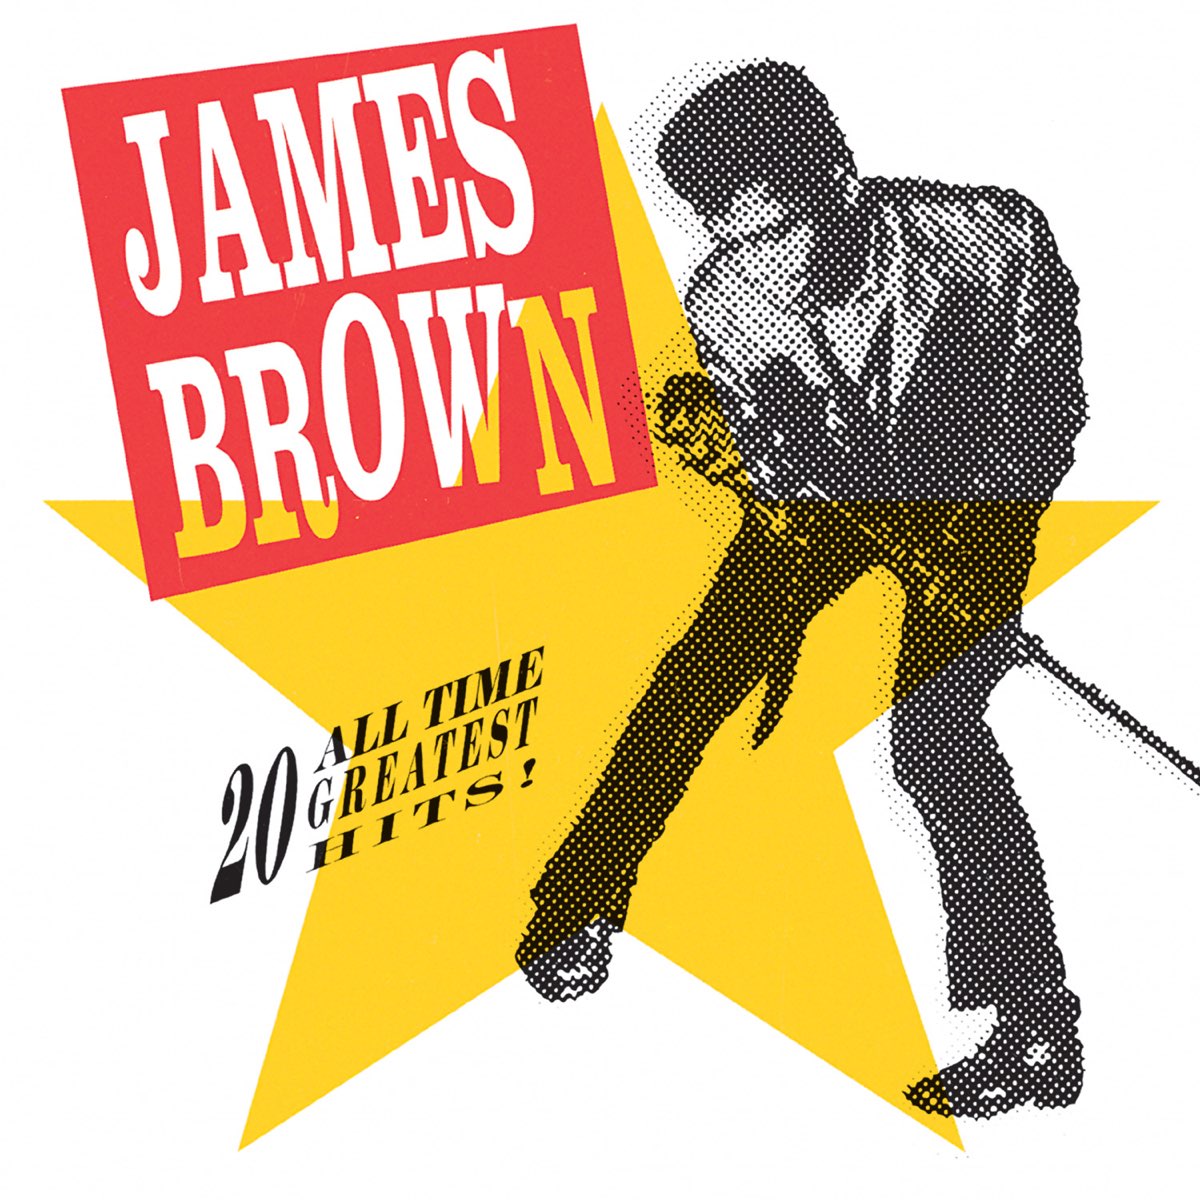 20 All-Time Greatest Hits! by James Brown on Apple Music